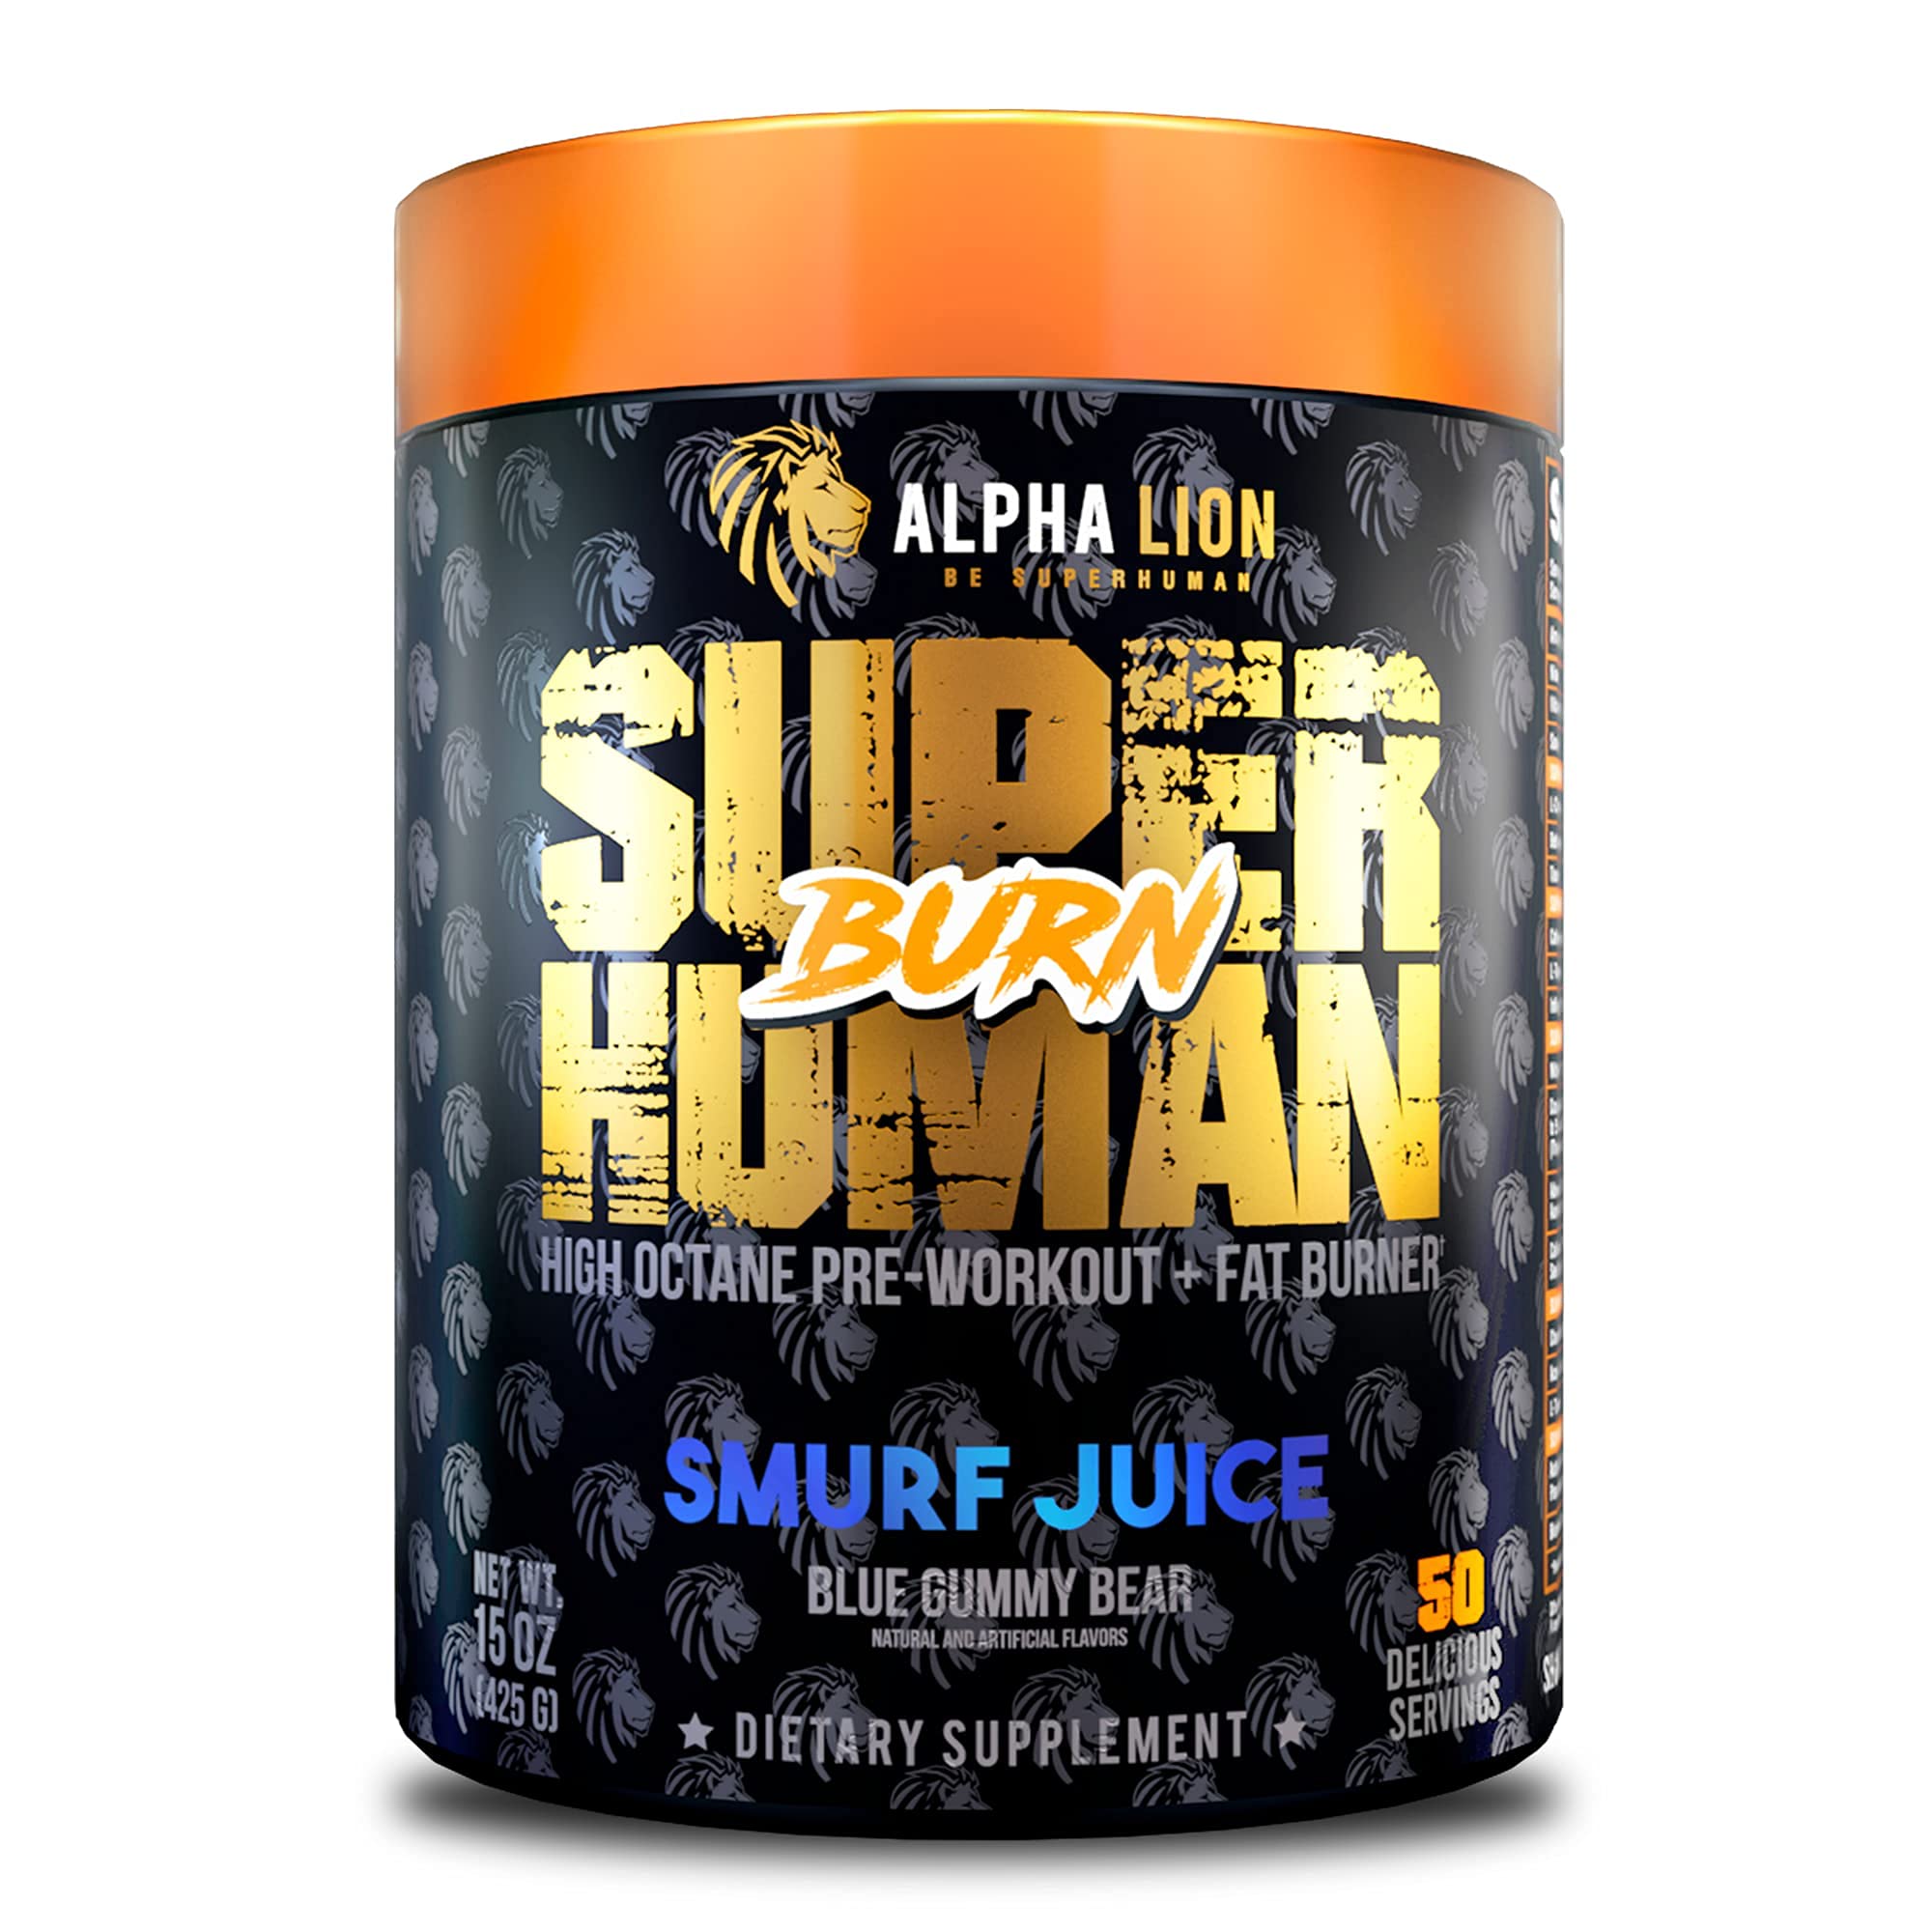 Alpha Lion Burn, 2 in 1 Fat Burning Preworkout Supplement, Appetite Suppressant and Energy Booster with Mitoburn, Acetyl L-Carnitine, Bitter Orange...